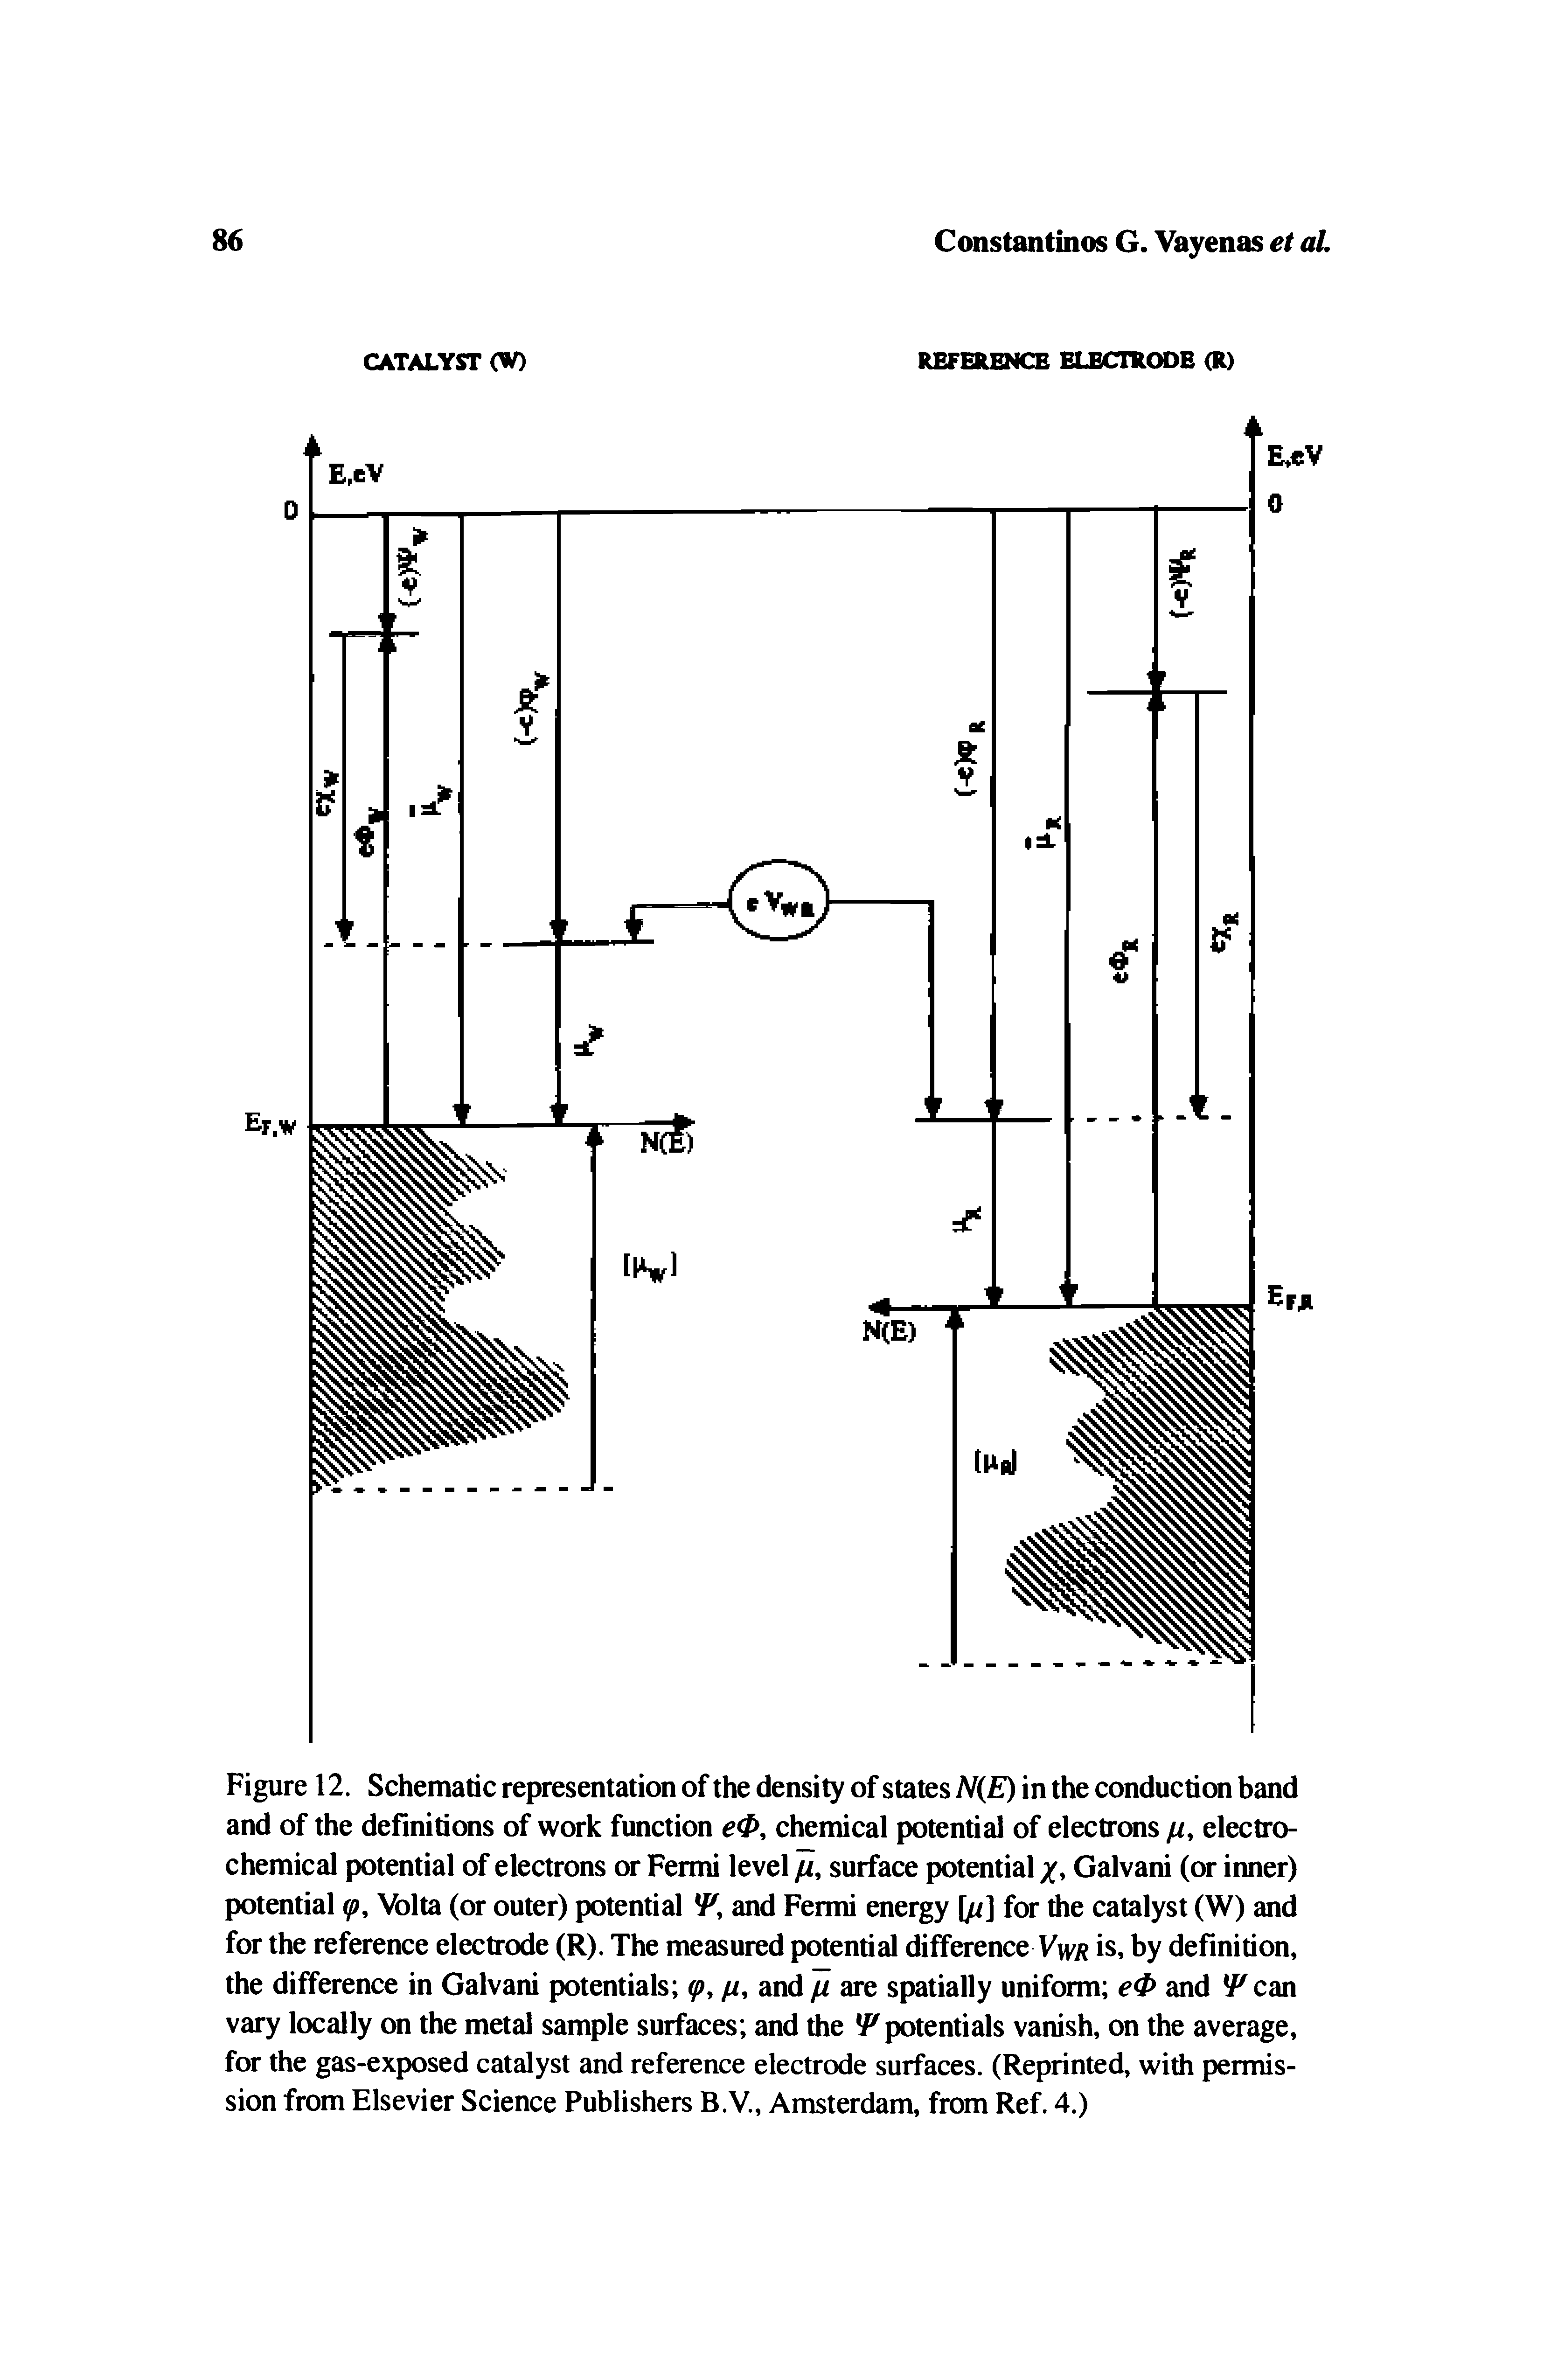 Figure 12. Schematic representation of the density of states N E) in the conduction band and of the definitions of work function chemical potential of electrons //, electrochemical potential of electrons or Fermi level //, surface potential Galvani (or inner) potential tp, Volta (or outer) potential and Fermi energy ] for the catalyst (W) and for the reference electrode (R). The measured potential difference Vw/ is, by definition, the difference in Galvani potentials (p, pi, and // are spatially uniform e4> and cm vary locally on the metal sample surfaces and the potentials vanish, on the average, for the gas-exposed catalyst and reference electrode surfaces. (Reprinted, with permission from Elsevier Science Publishers B.V., Amsterdam, from Ref. 4.)...